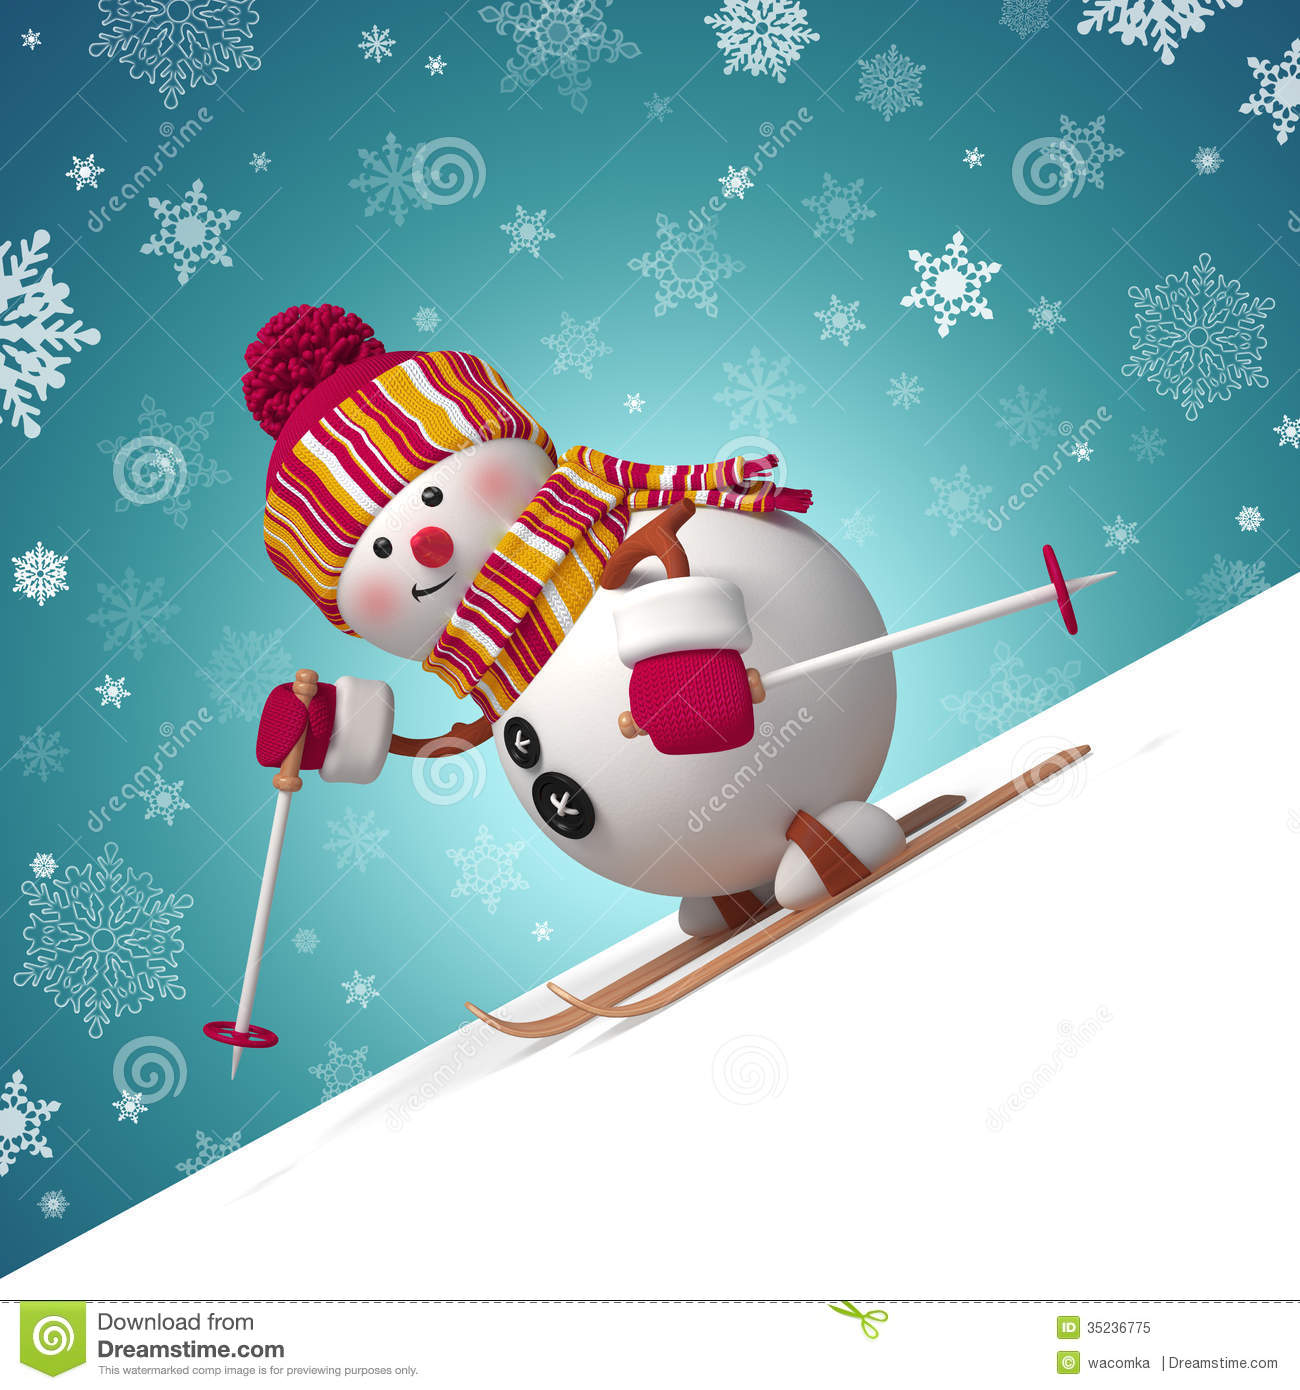 Christmas Greeting Card With 3d Cartoon Snowman Sliding Down The Hill